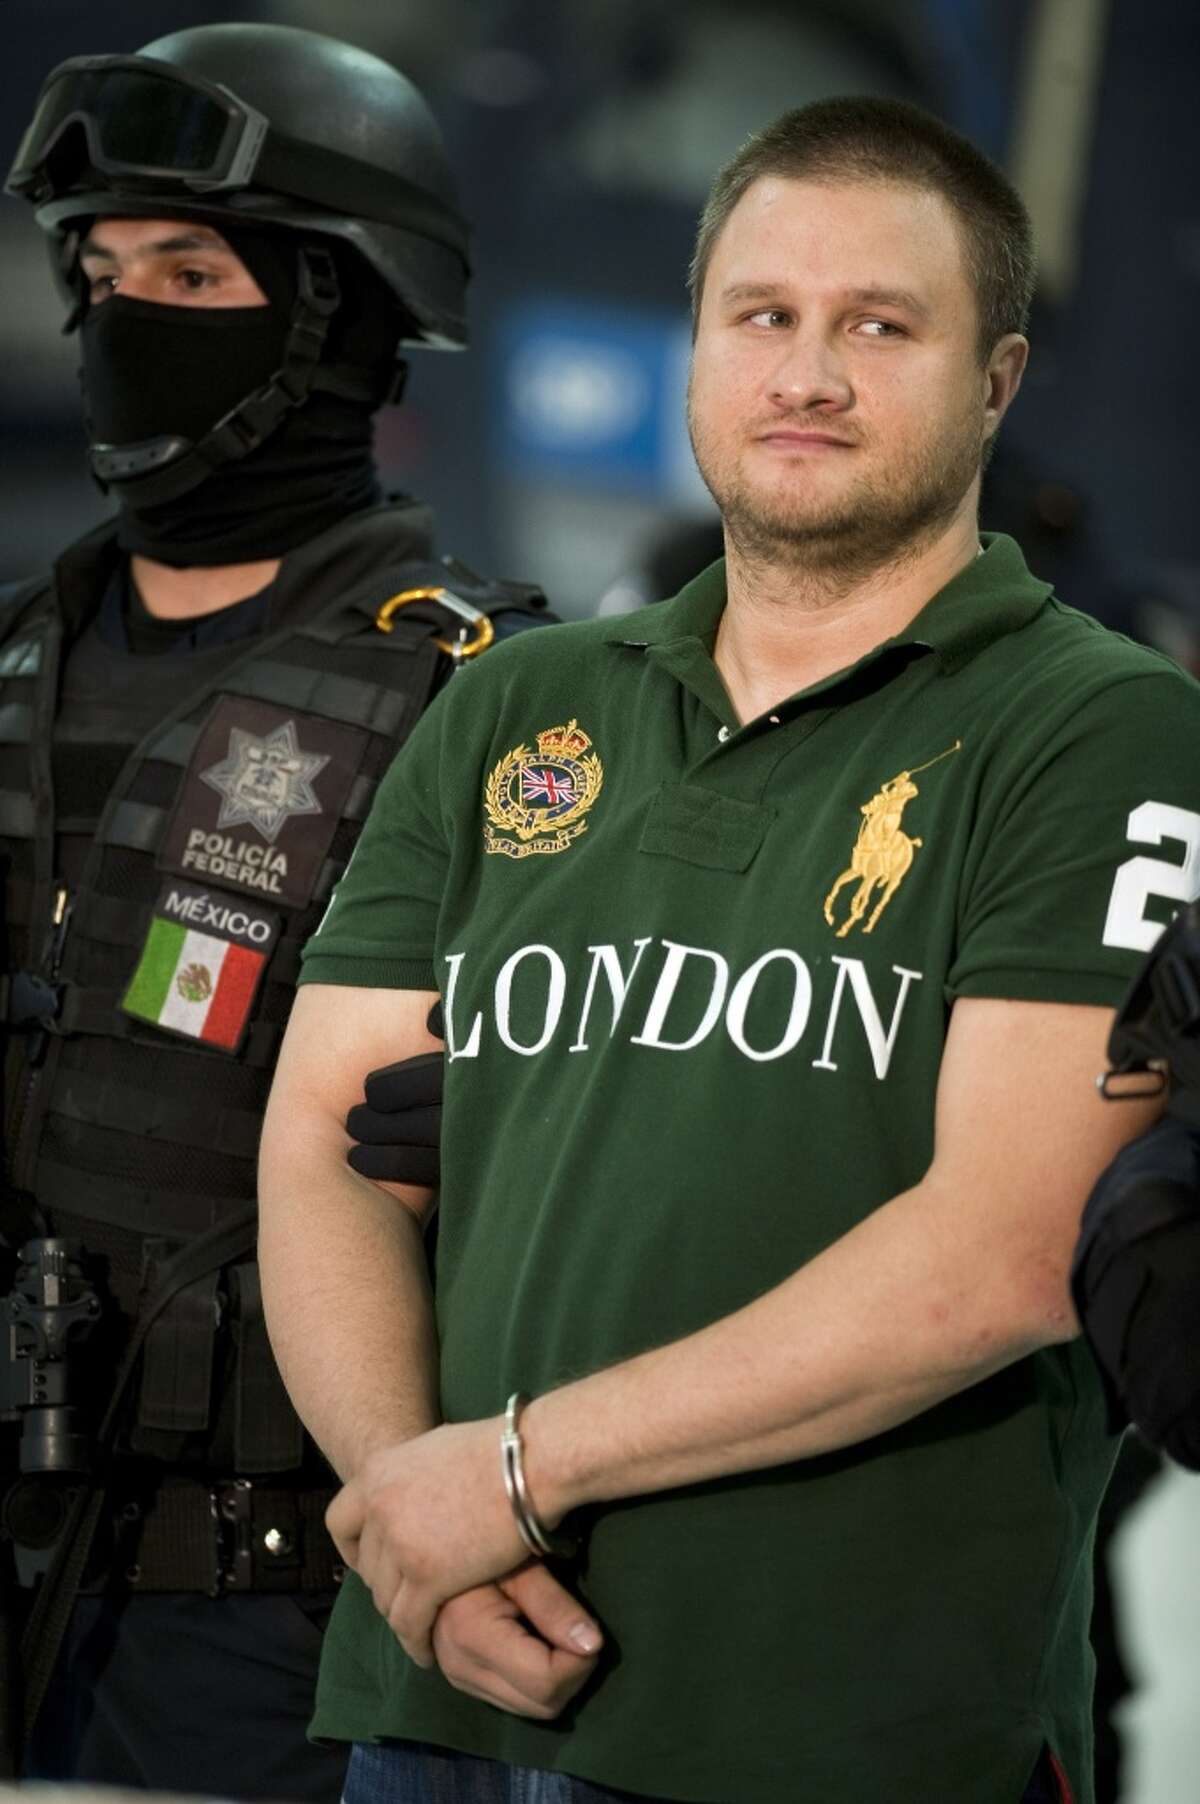 Edgar Valdez Villareal aka 'La Barbie' of the Beltran Leyva drug cartel, is presented to the press at the Federal Police headquarters in Mexico City, on August 31, 2010. Mexican authorities on Monday announced the capture of one of the country's most sought after drug kingpins, US-born Valdez Villarreal, known as 'the Barbie' for his fair complexion. Valdez was detained in a police operation in central Mexico, following intelligence work which began in June 2009. The 37-year-old was a key lieutenant of Arturo Beltran Leyva, who headed the cartel that bears his name and was Mexico's third most-wanted man until his December 2009 death in a military operation. AFP PHOTO/Alfredo Estrella (Photo credit should read ALFREDO ESTRELLA/AFP/Getty Images)